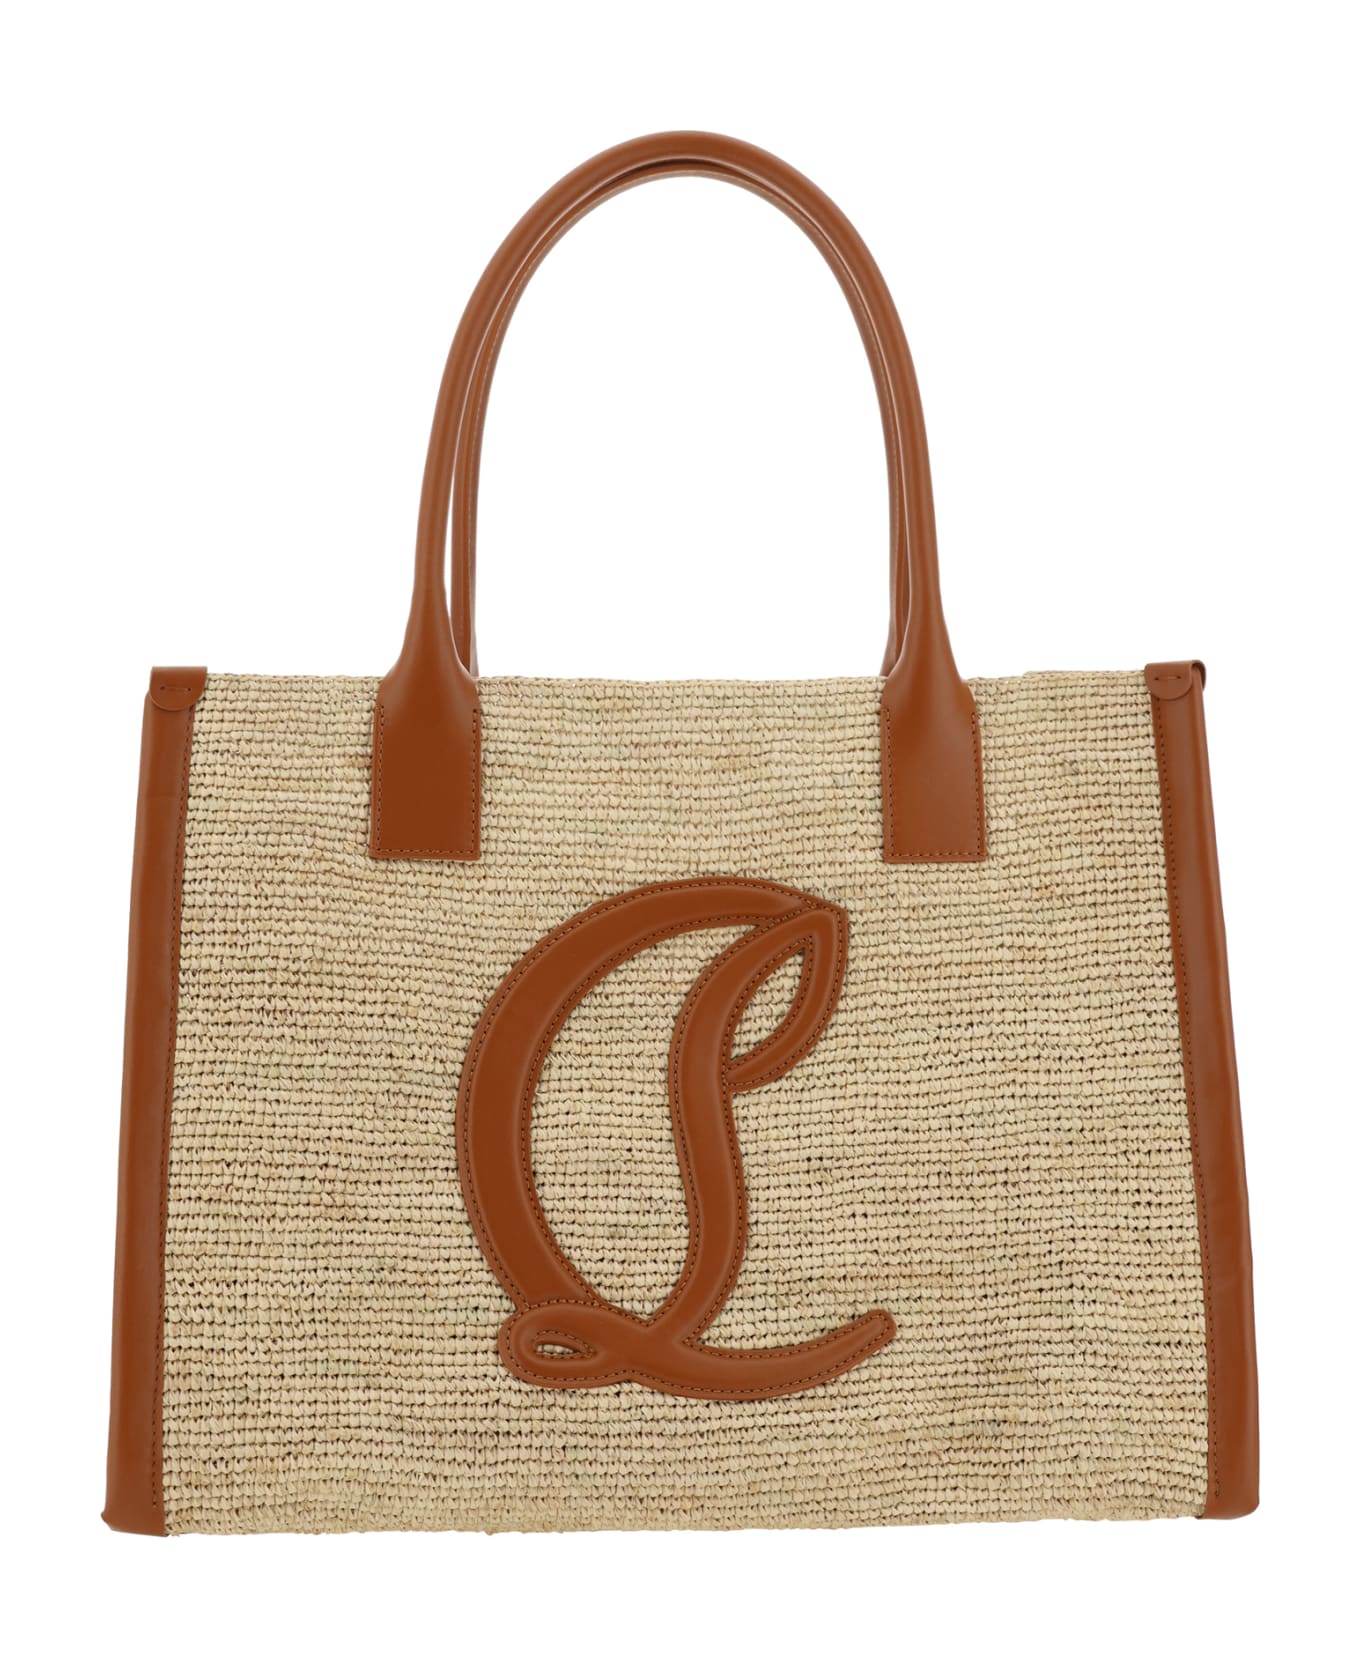 Christian Louboutin By My Side Large Tote Handbag - Natural/cuoio トートバッグ